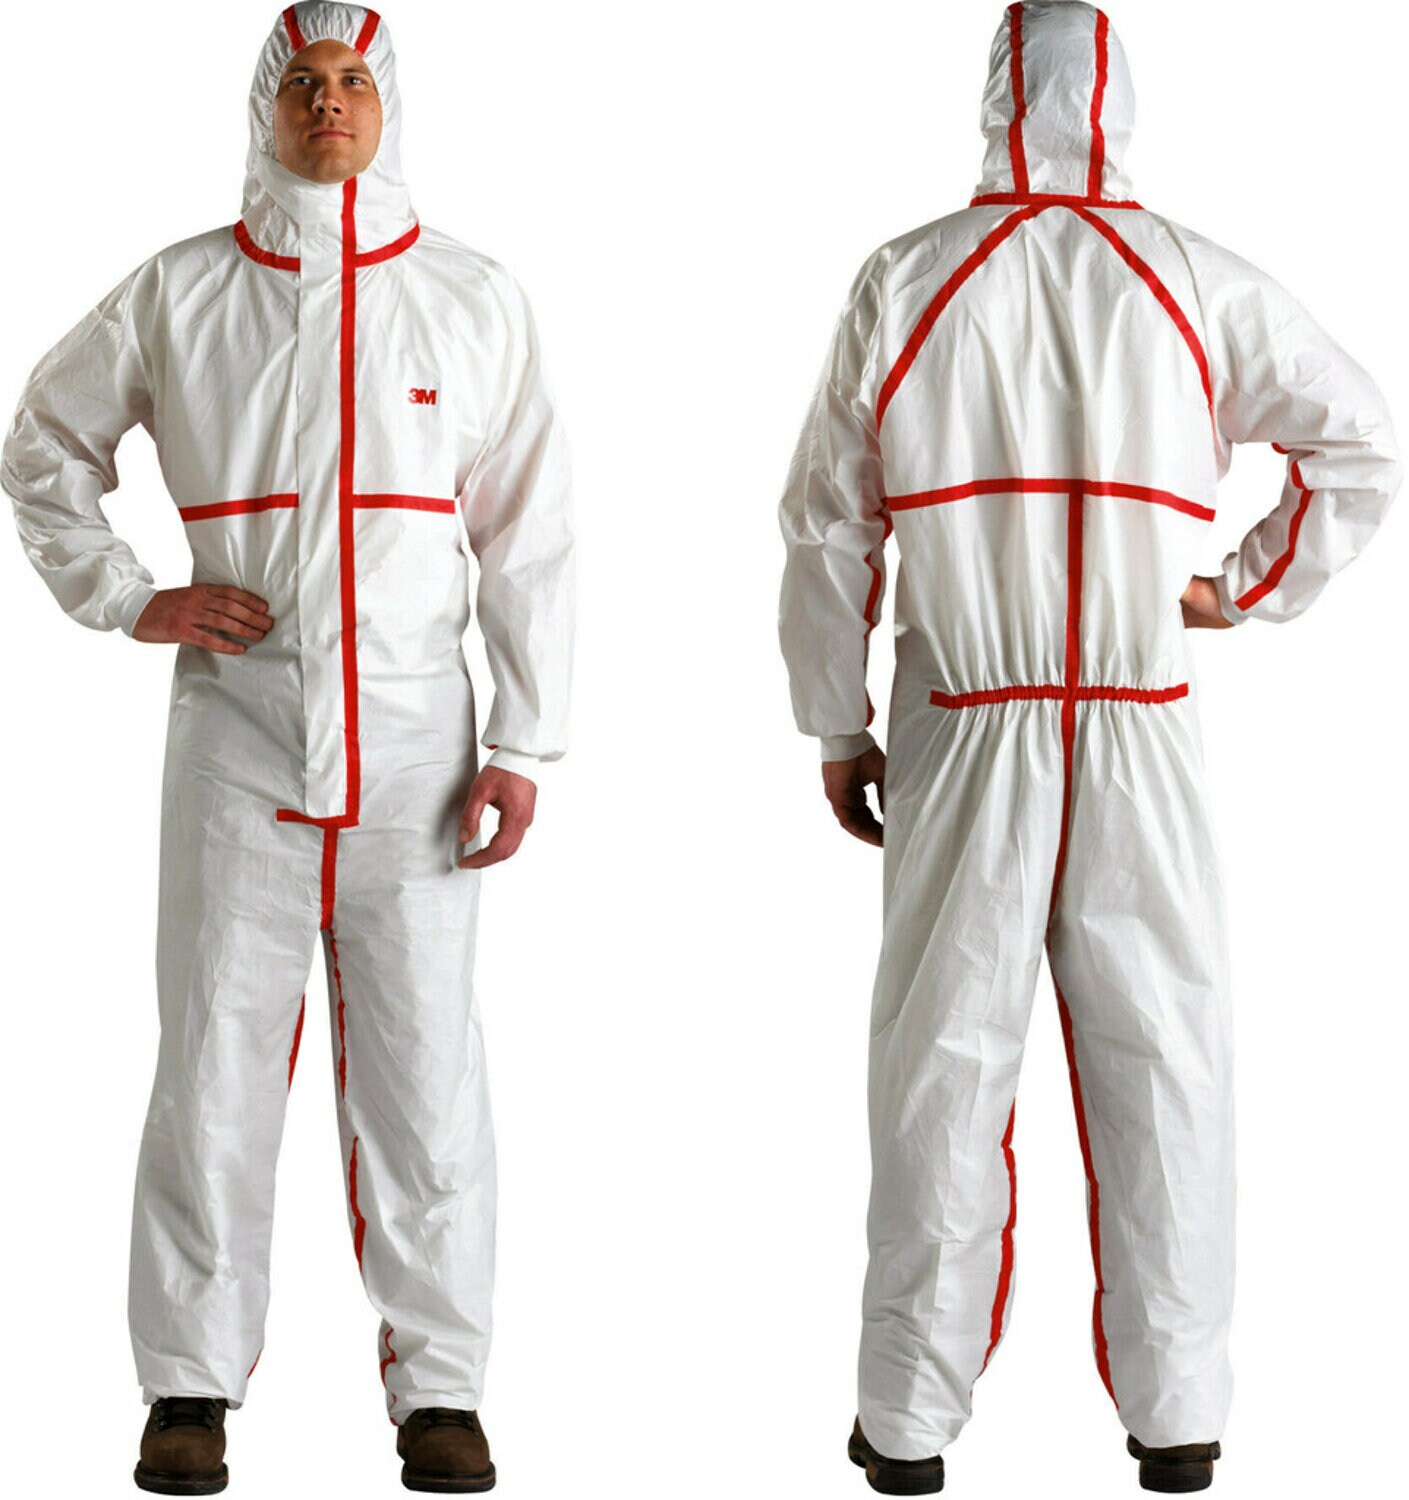 7000141115 - 3M Disposable Chemical Protective Coverall 4565-BLK-4XL, 25 EA/Case